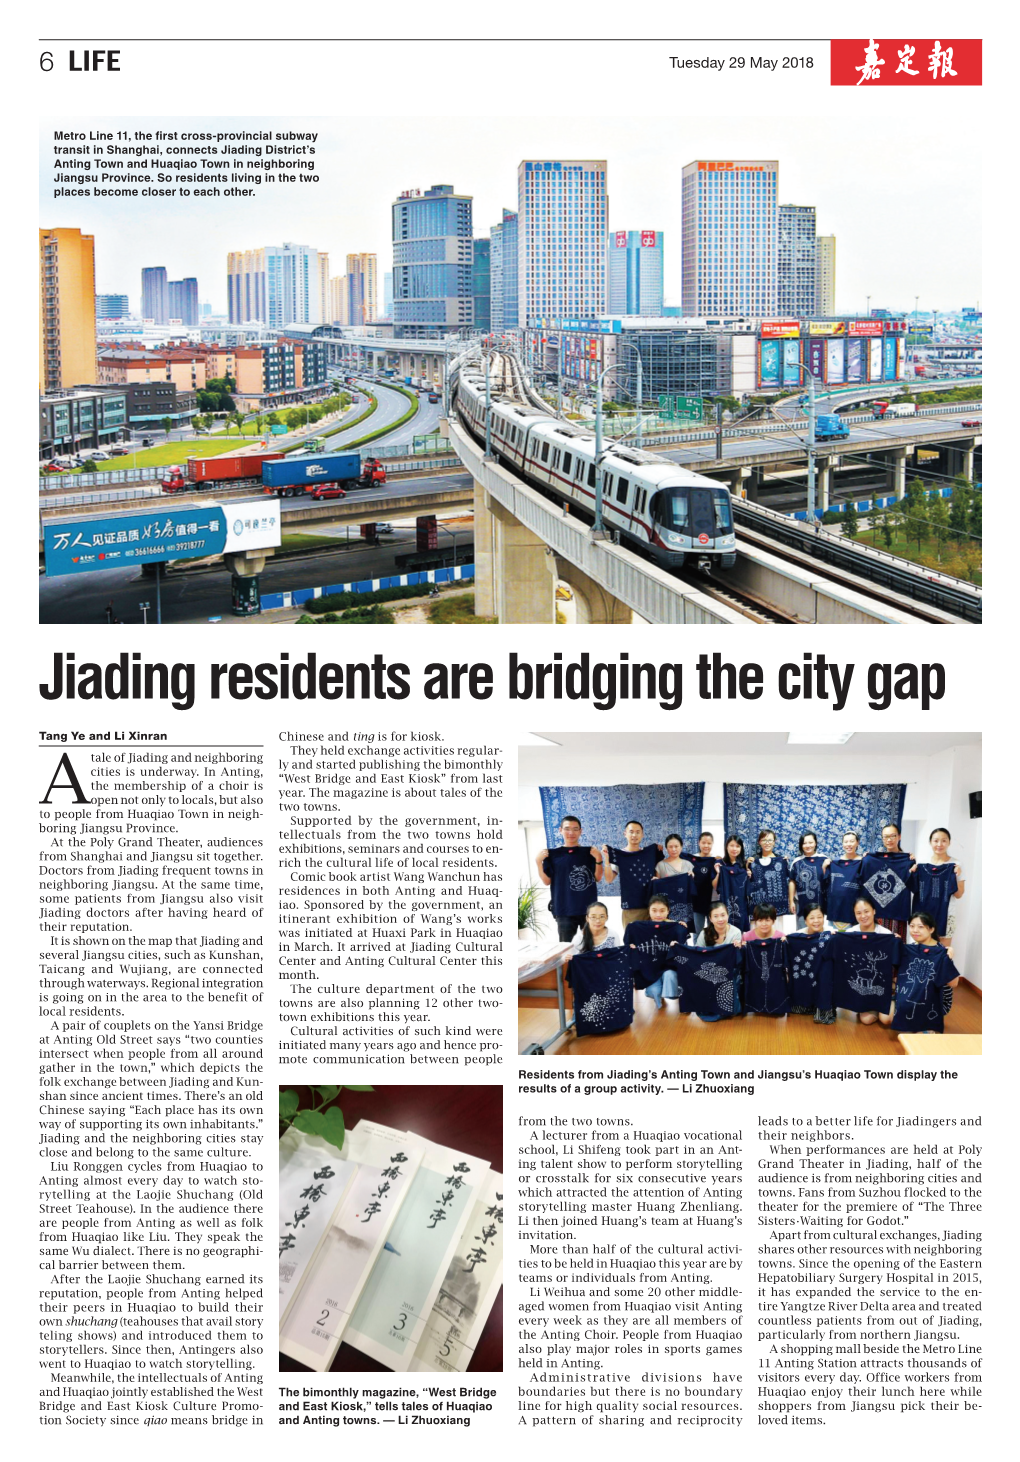 Jiading Residents Are Bridging the City Gap